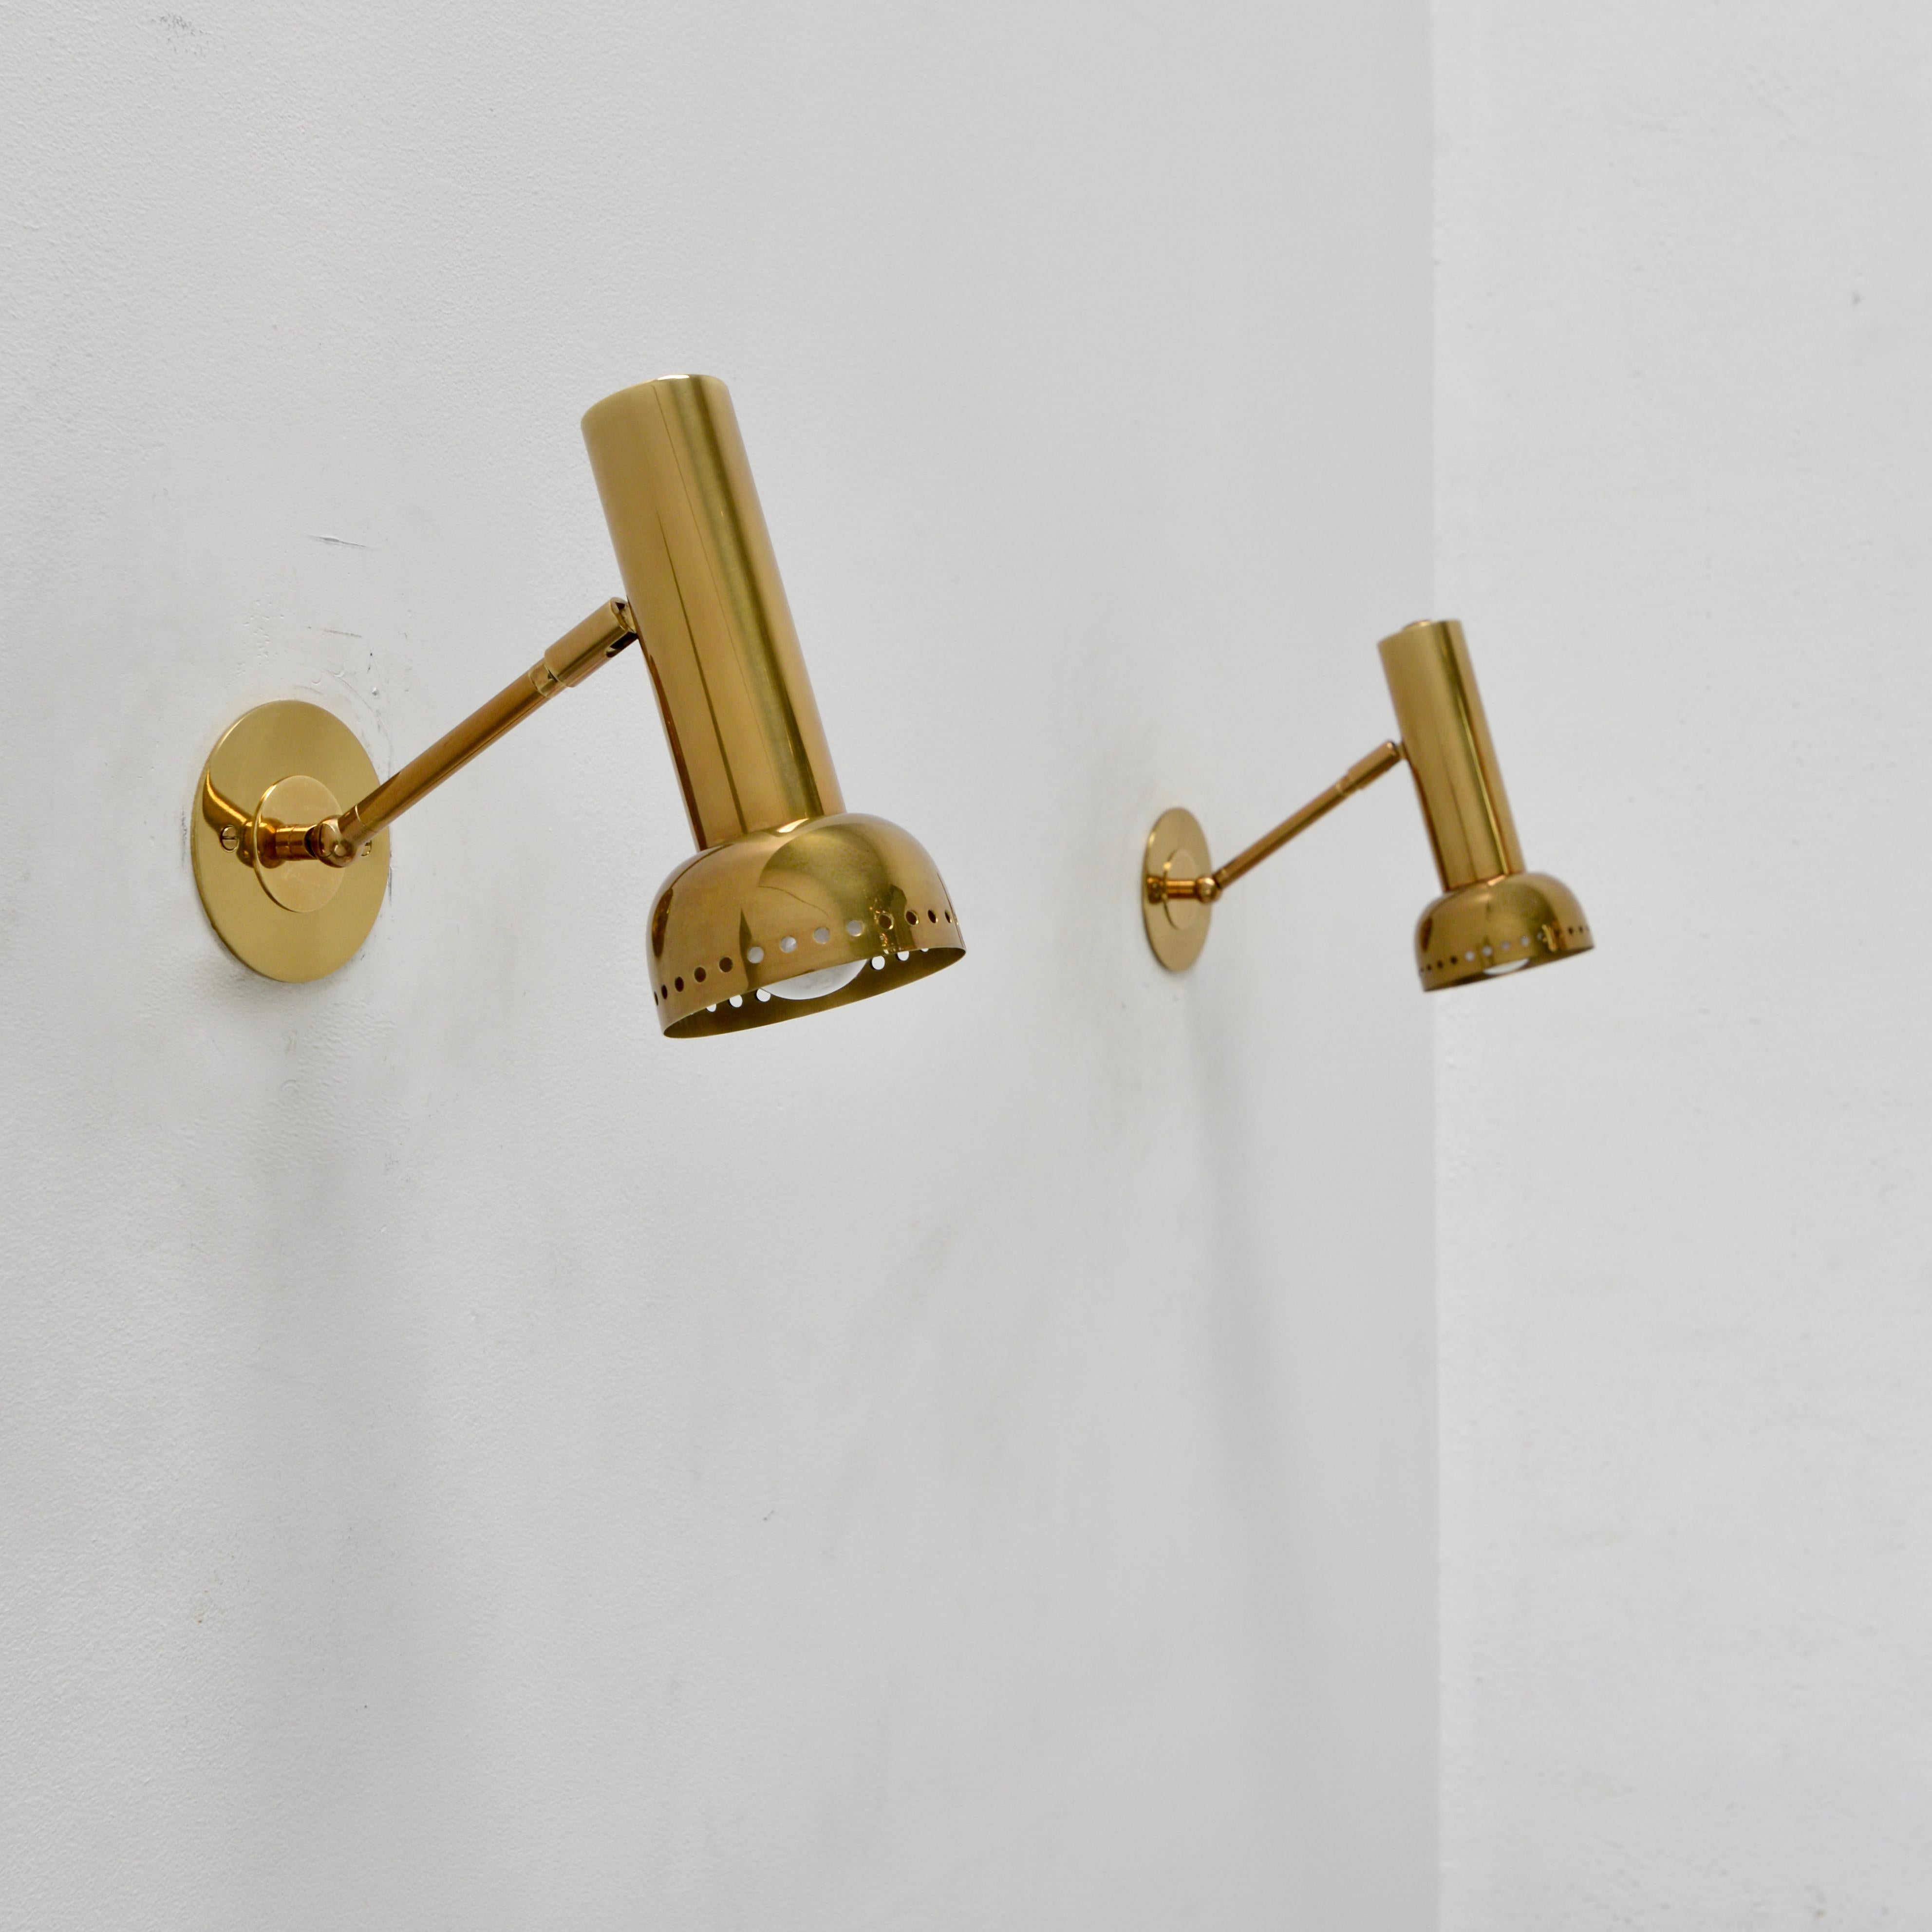 Handsome brass D-LU Sconce. An all brass Directional wall sconce in light gold brass with perforations by Lumfardo Luminaires. Made contemporary in the US. Multiples available for order. Can be wired for use anywhere in the world. Option for switch